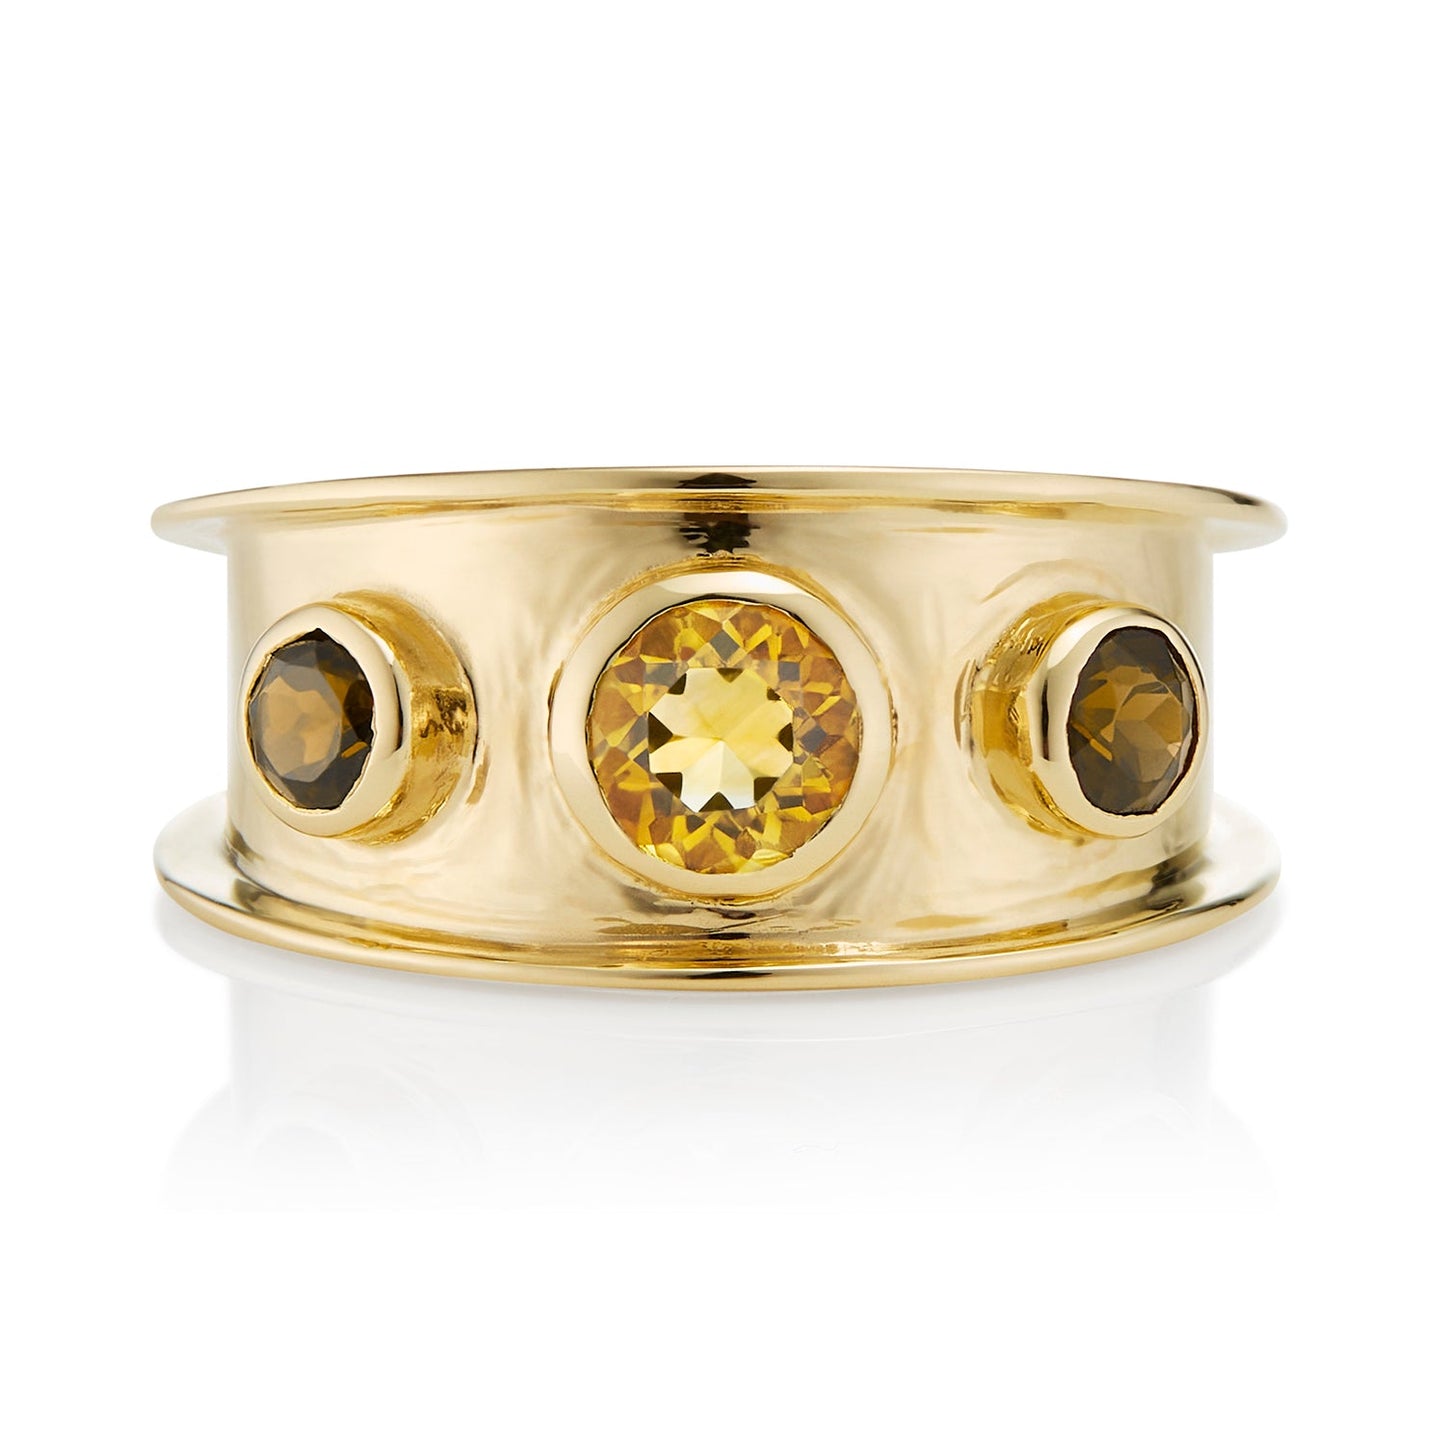 Load image into Gallery viewer, London-made luxury custom gold gemstone jewellery -9ct Yellow Gold Statement Ring in Citrine and Smoky Quartz – Andalusian Collection, Augustine Jewellery, British Jewellers, Gemstone Jewellery, Luxury Jewellery London.
